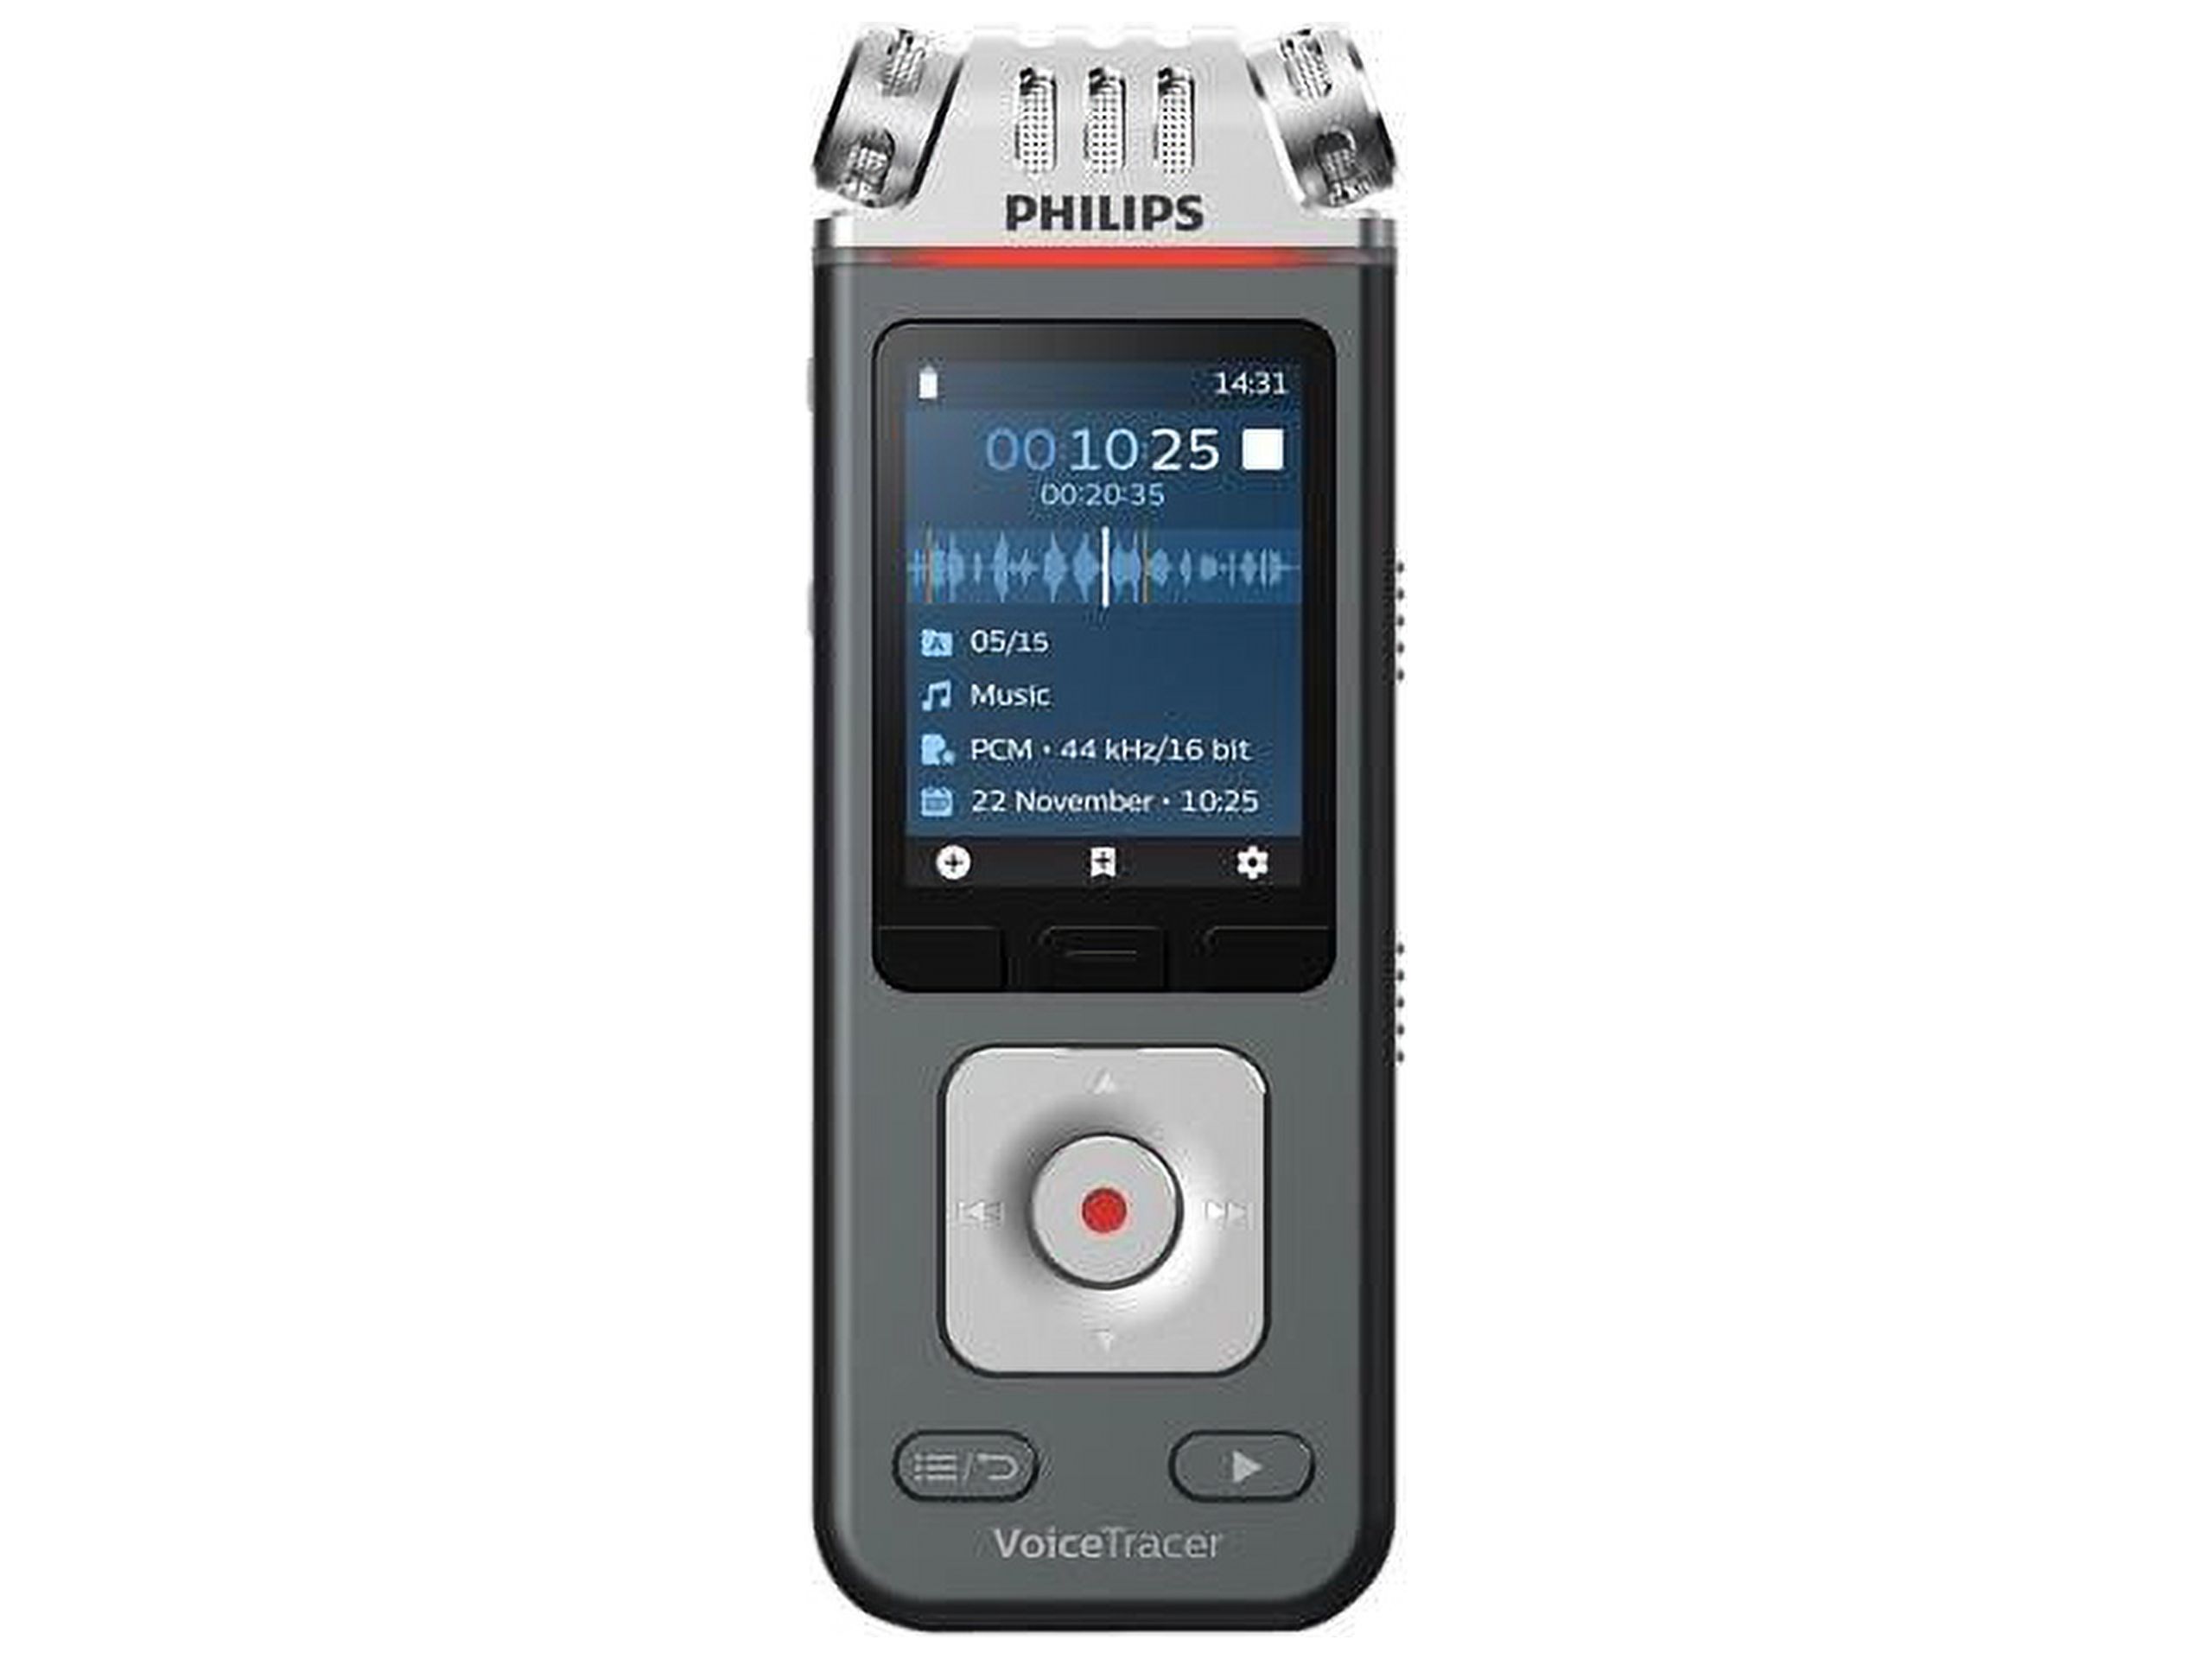 Philips DVT8110 VoiceTracer Meeting Recorder - image 1 of 9